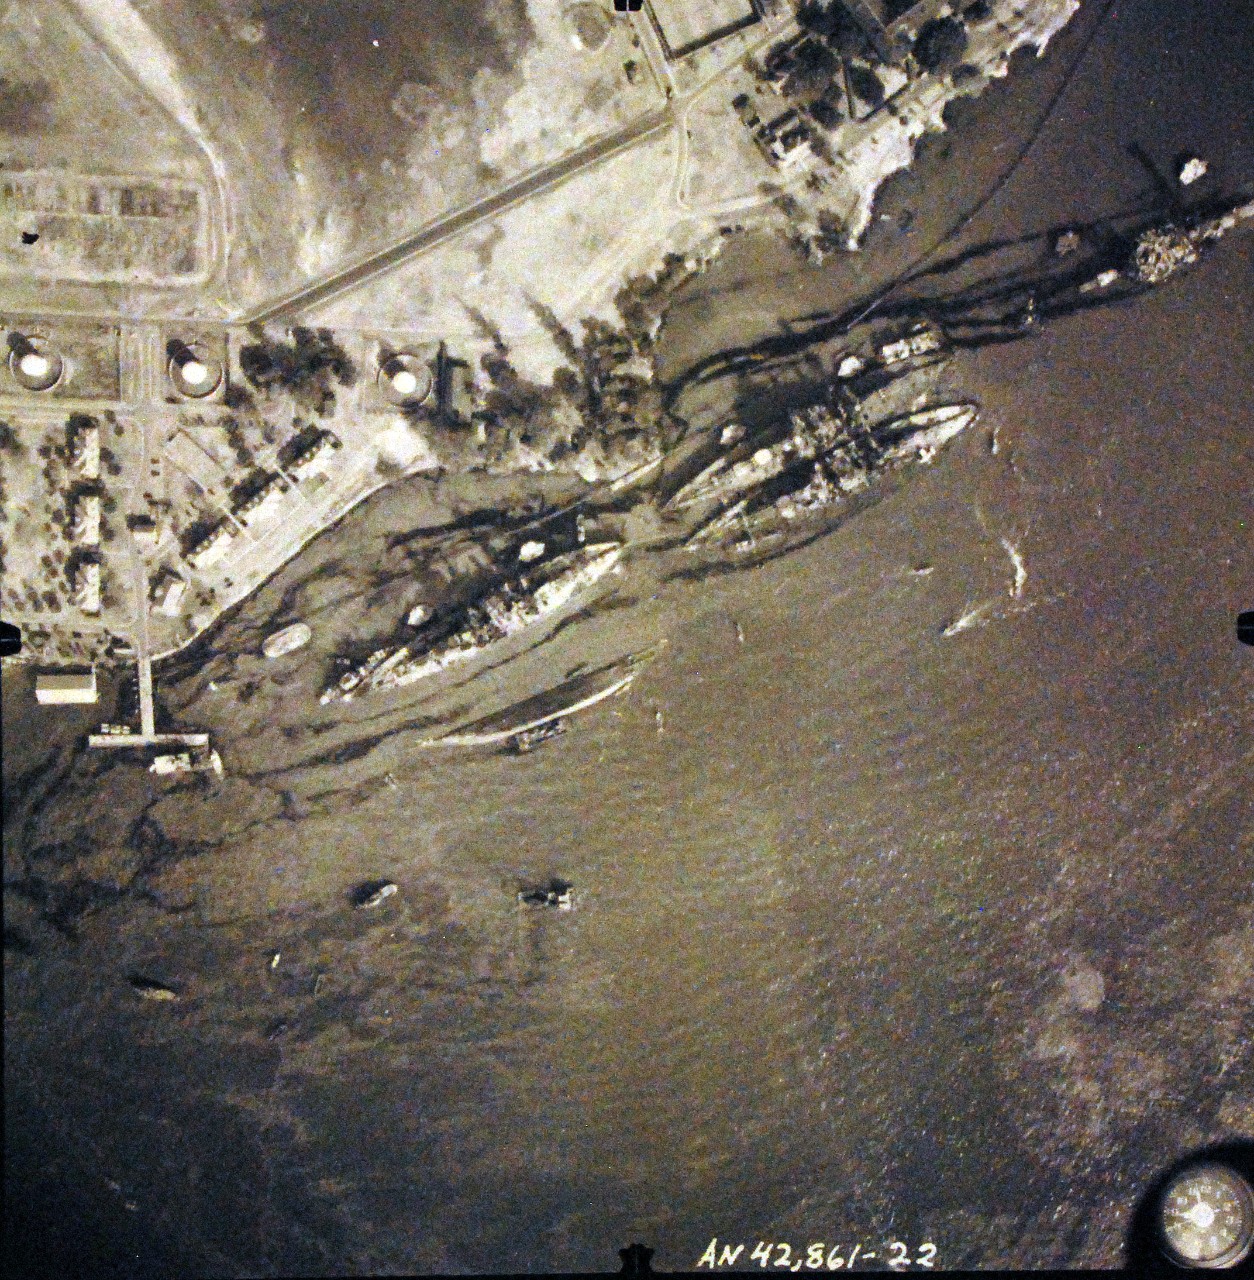 80-G-387583:  Pearl Harbor Attack, 7 December 1941.  Aerial view of "Battleship Row" moorings on the southern side of Ford Island, 10 December 1941, showing damage from the Japanese raid three days earlier.  Diagonally, from left center to lower right are: USS Maryland (BB-46), lightly damaged, with the capsized USS Oklahoma (BB-37) outboard. USS Tennessee (BB-43), lightly damaged, with the sunken USS West Virginia (BB-48) outboard. USS Arizona (BB-39), sunk, with her hull shattered by the explosion of the magazines below the two forward turrets. Note dark oil streaks on the harbor surface, originating from the sunken battleships. Photographed by VJ-1 at an altitude of 3,000 feet and released November 9, 1950. U.S. Navy photograph, now in the collections of the National Archives.      (9/22/2015).